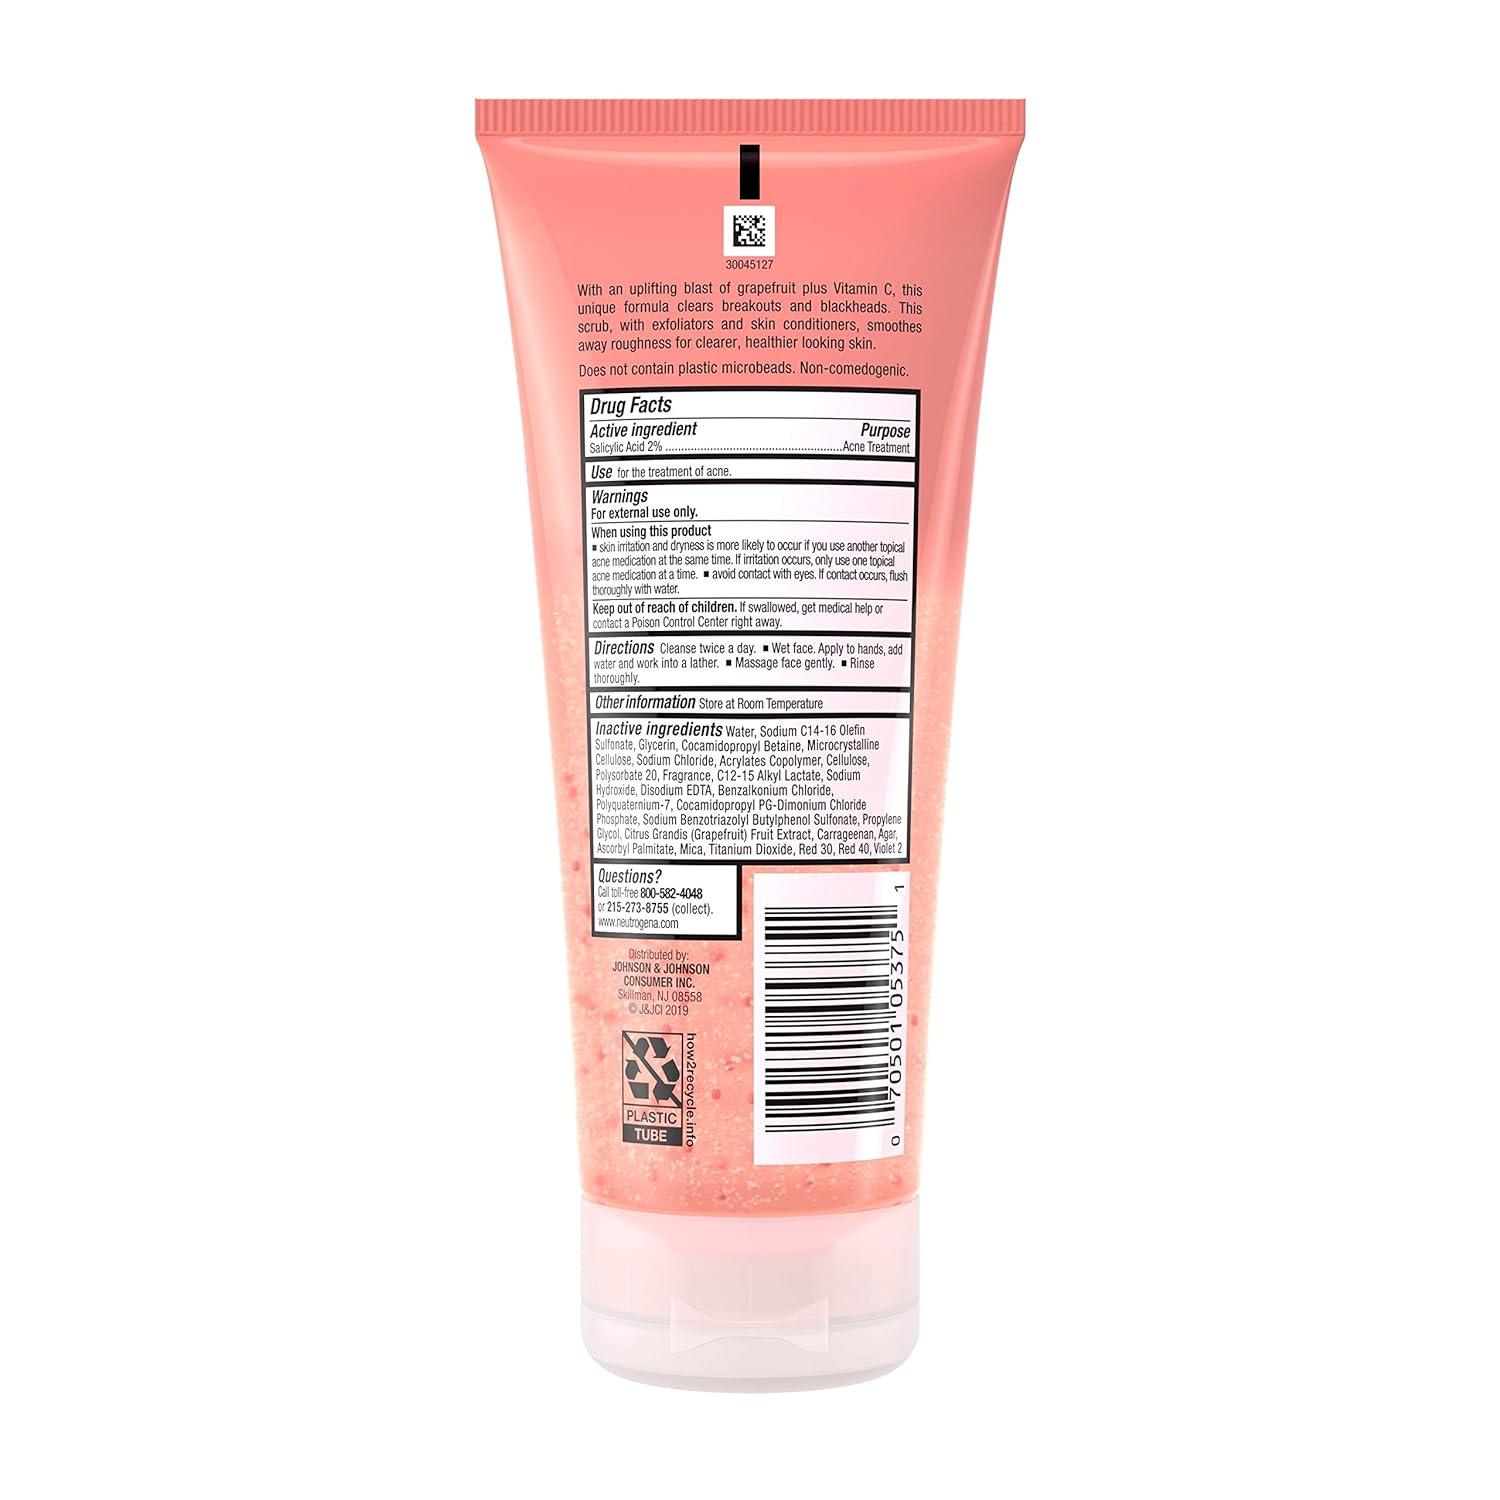 Neutrogena Oil Free Pink Grapefruit Acne Treatment Face Wash with Vitamin C  2% Salicylic Acid Gentle Foaming Facial Scrub to Treat & Prevent Breakouts  6.7 Fl Oz Pack of 3